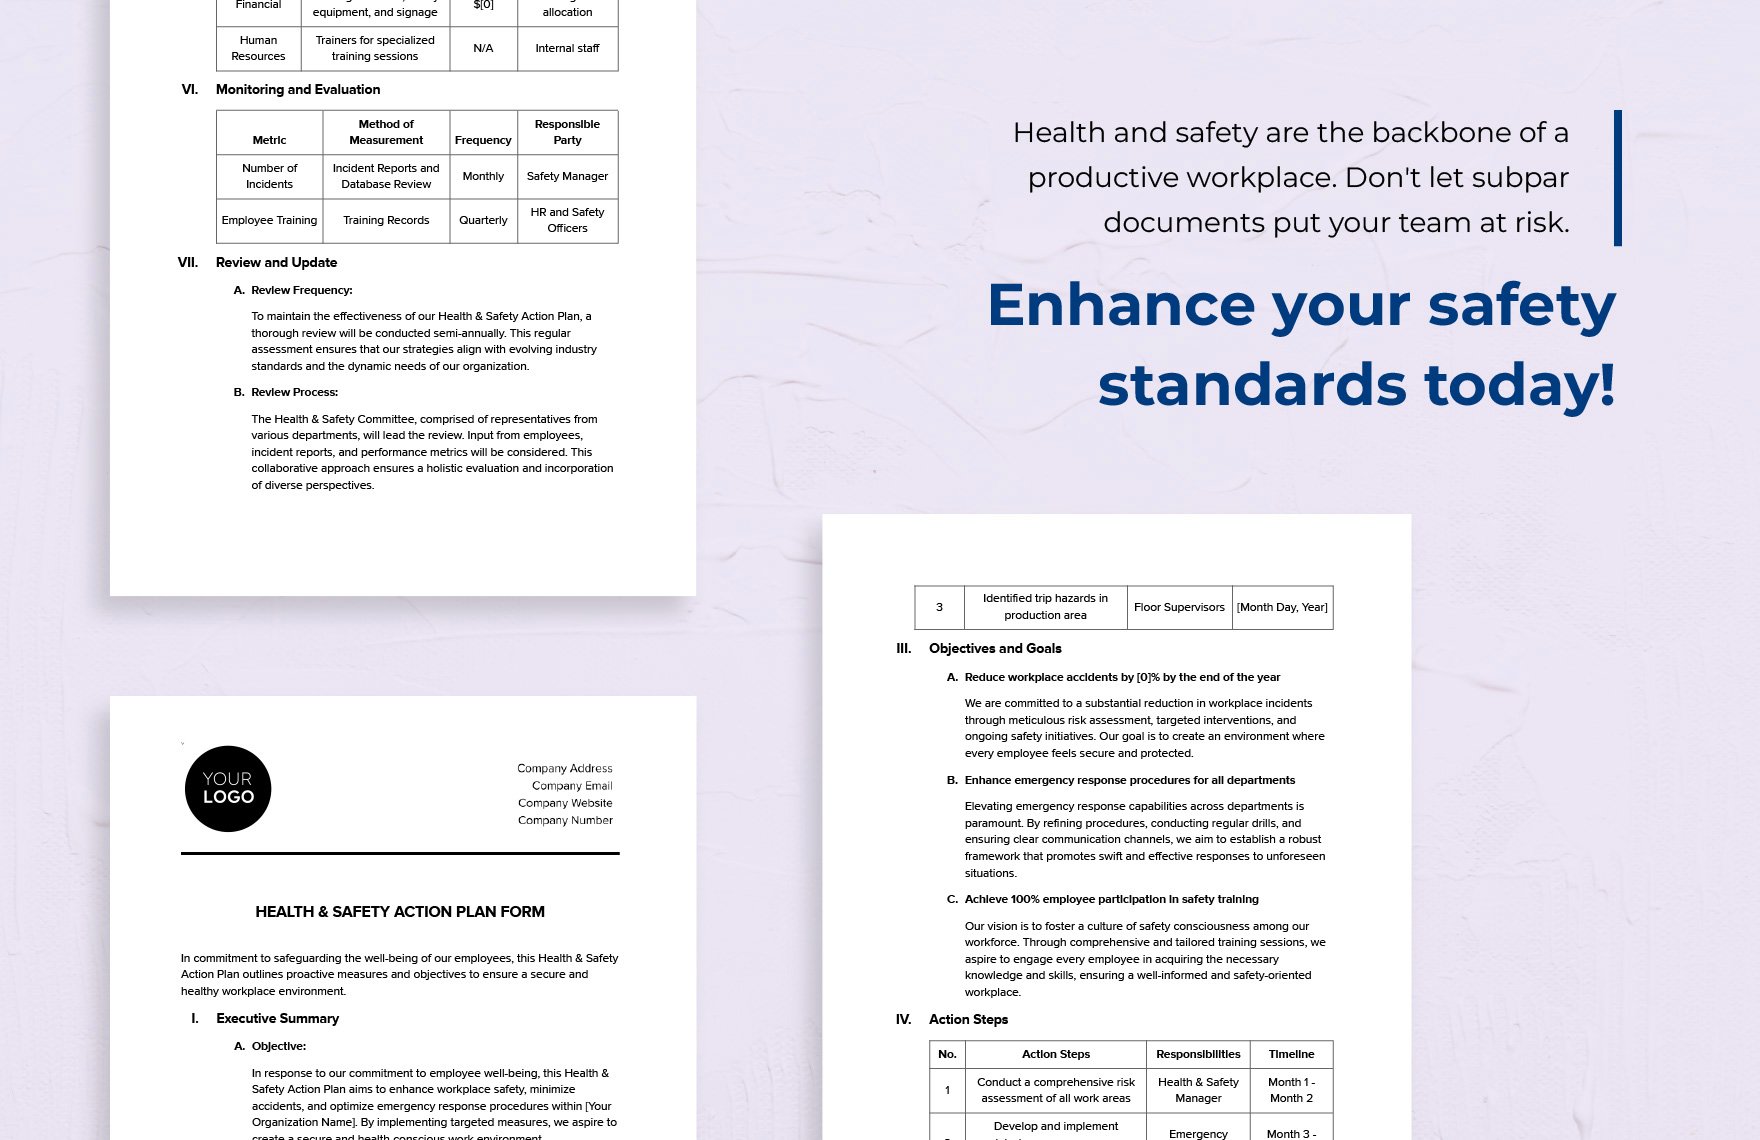 Health & Safety Action Plan Form Template